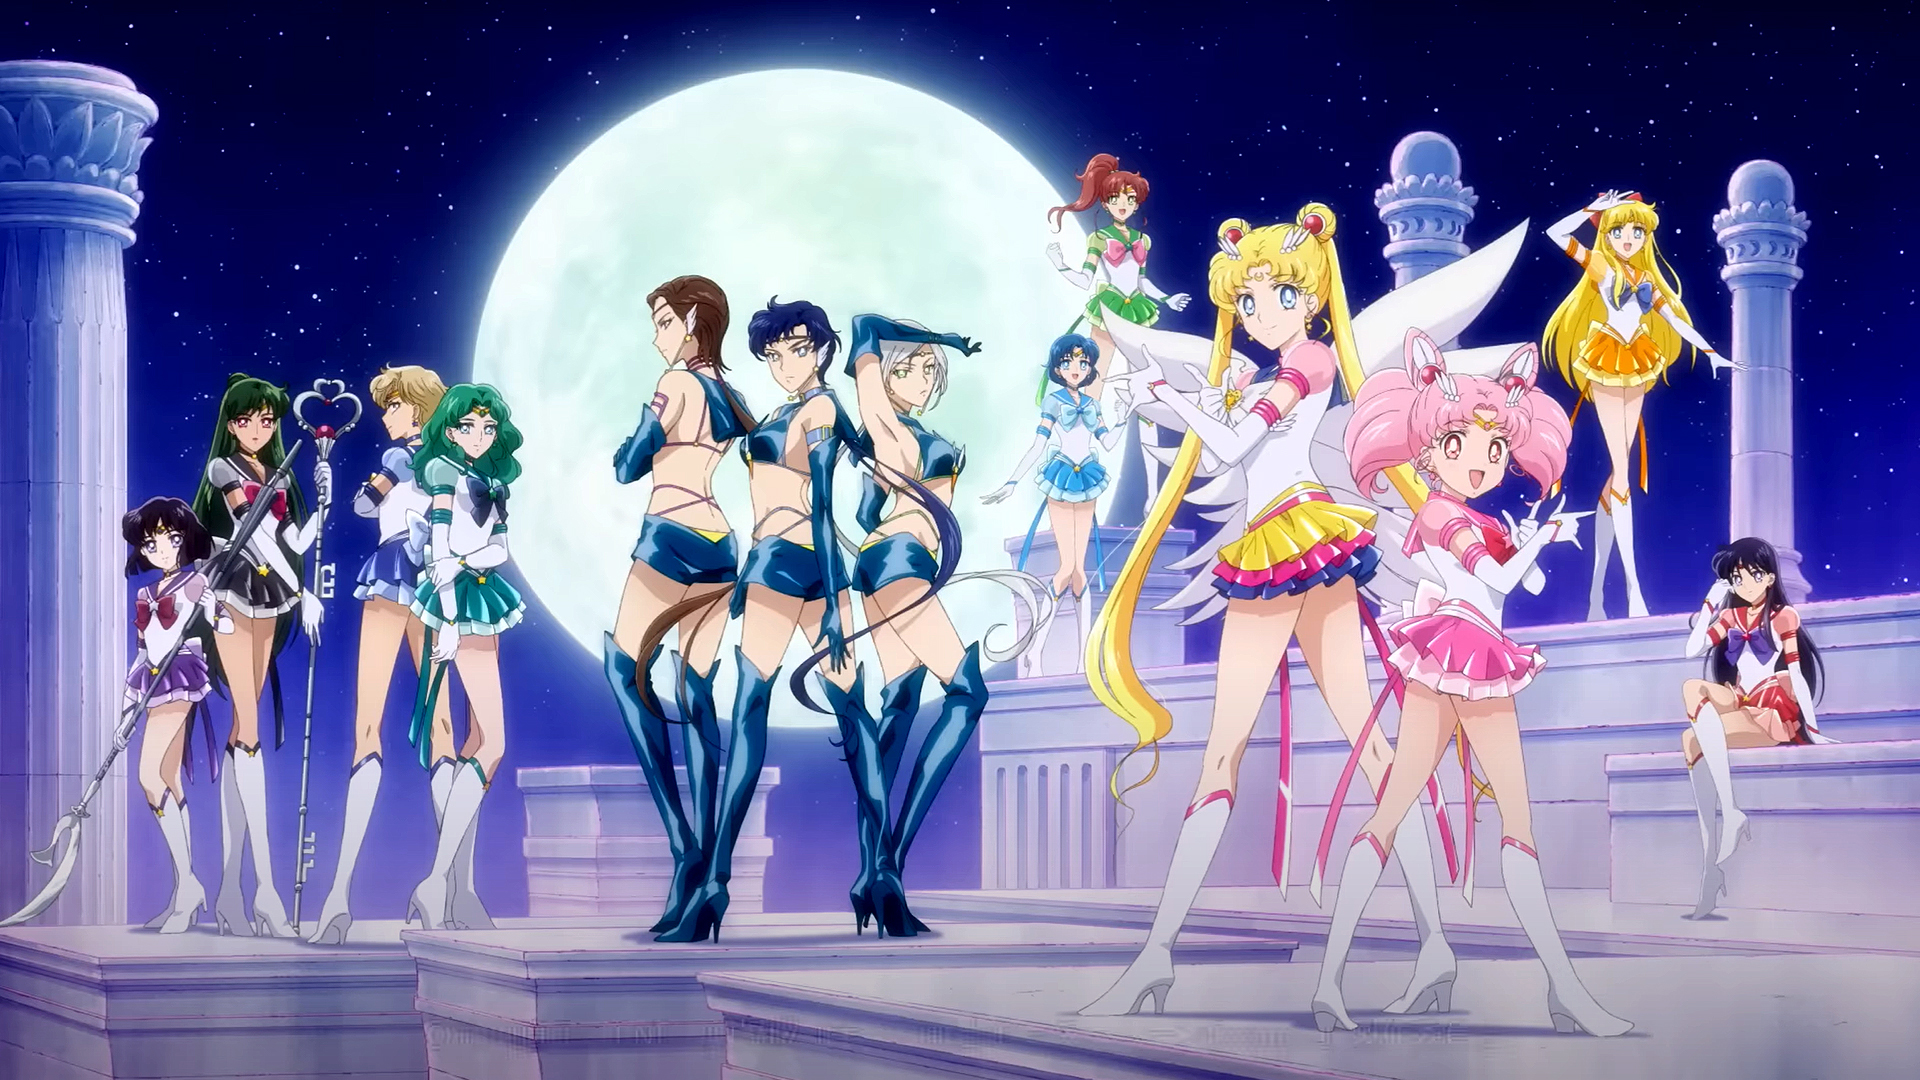 Sailor Moon Cosmos Part 1 opening screenshot with Eternal Sailor Moon, Eternal Sailor Mini Moon, the Sailor Starlights, the Inner Guardians, and the Outer Guardians.